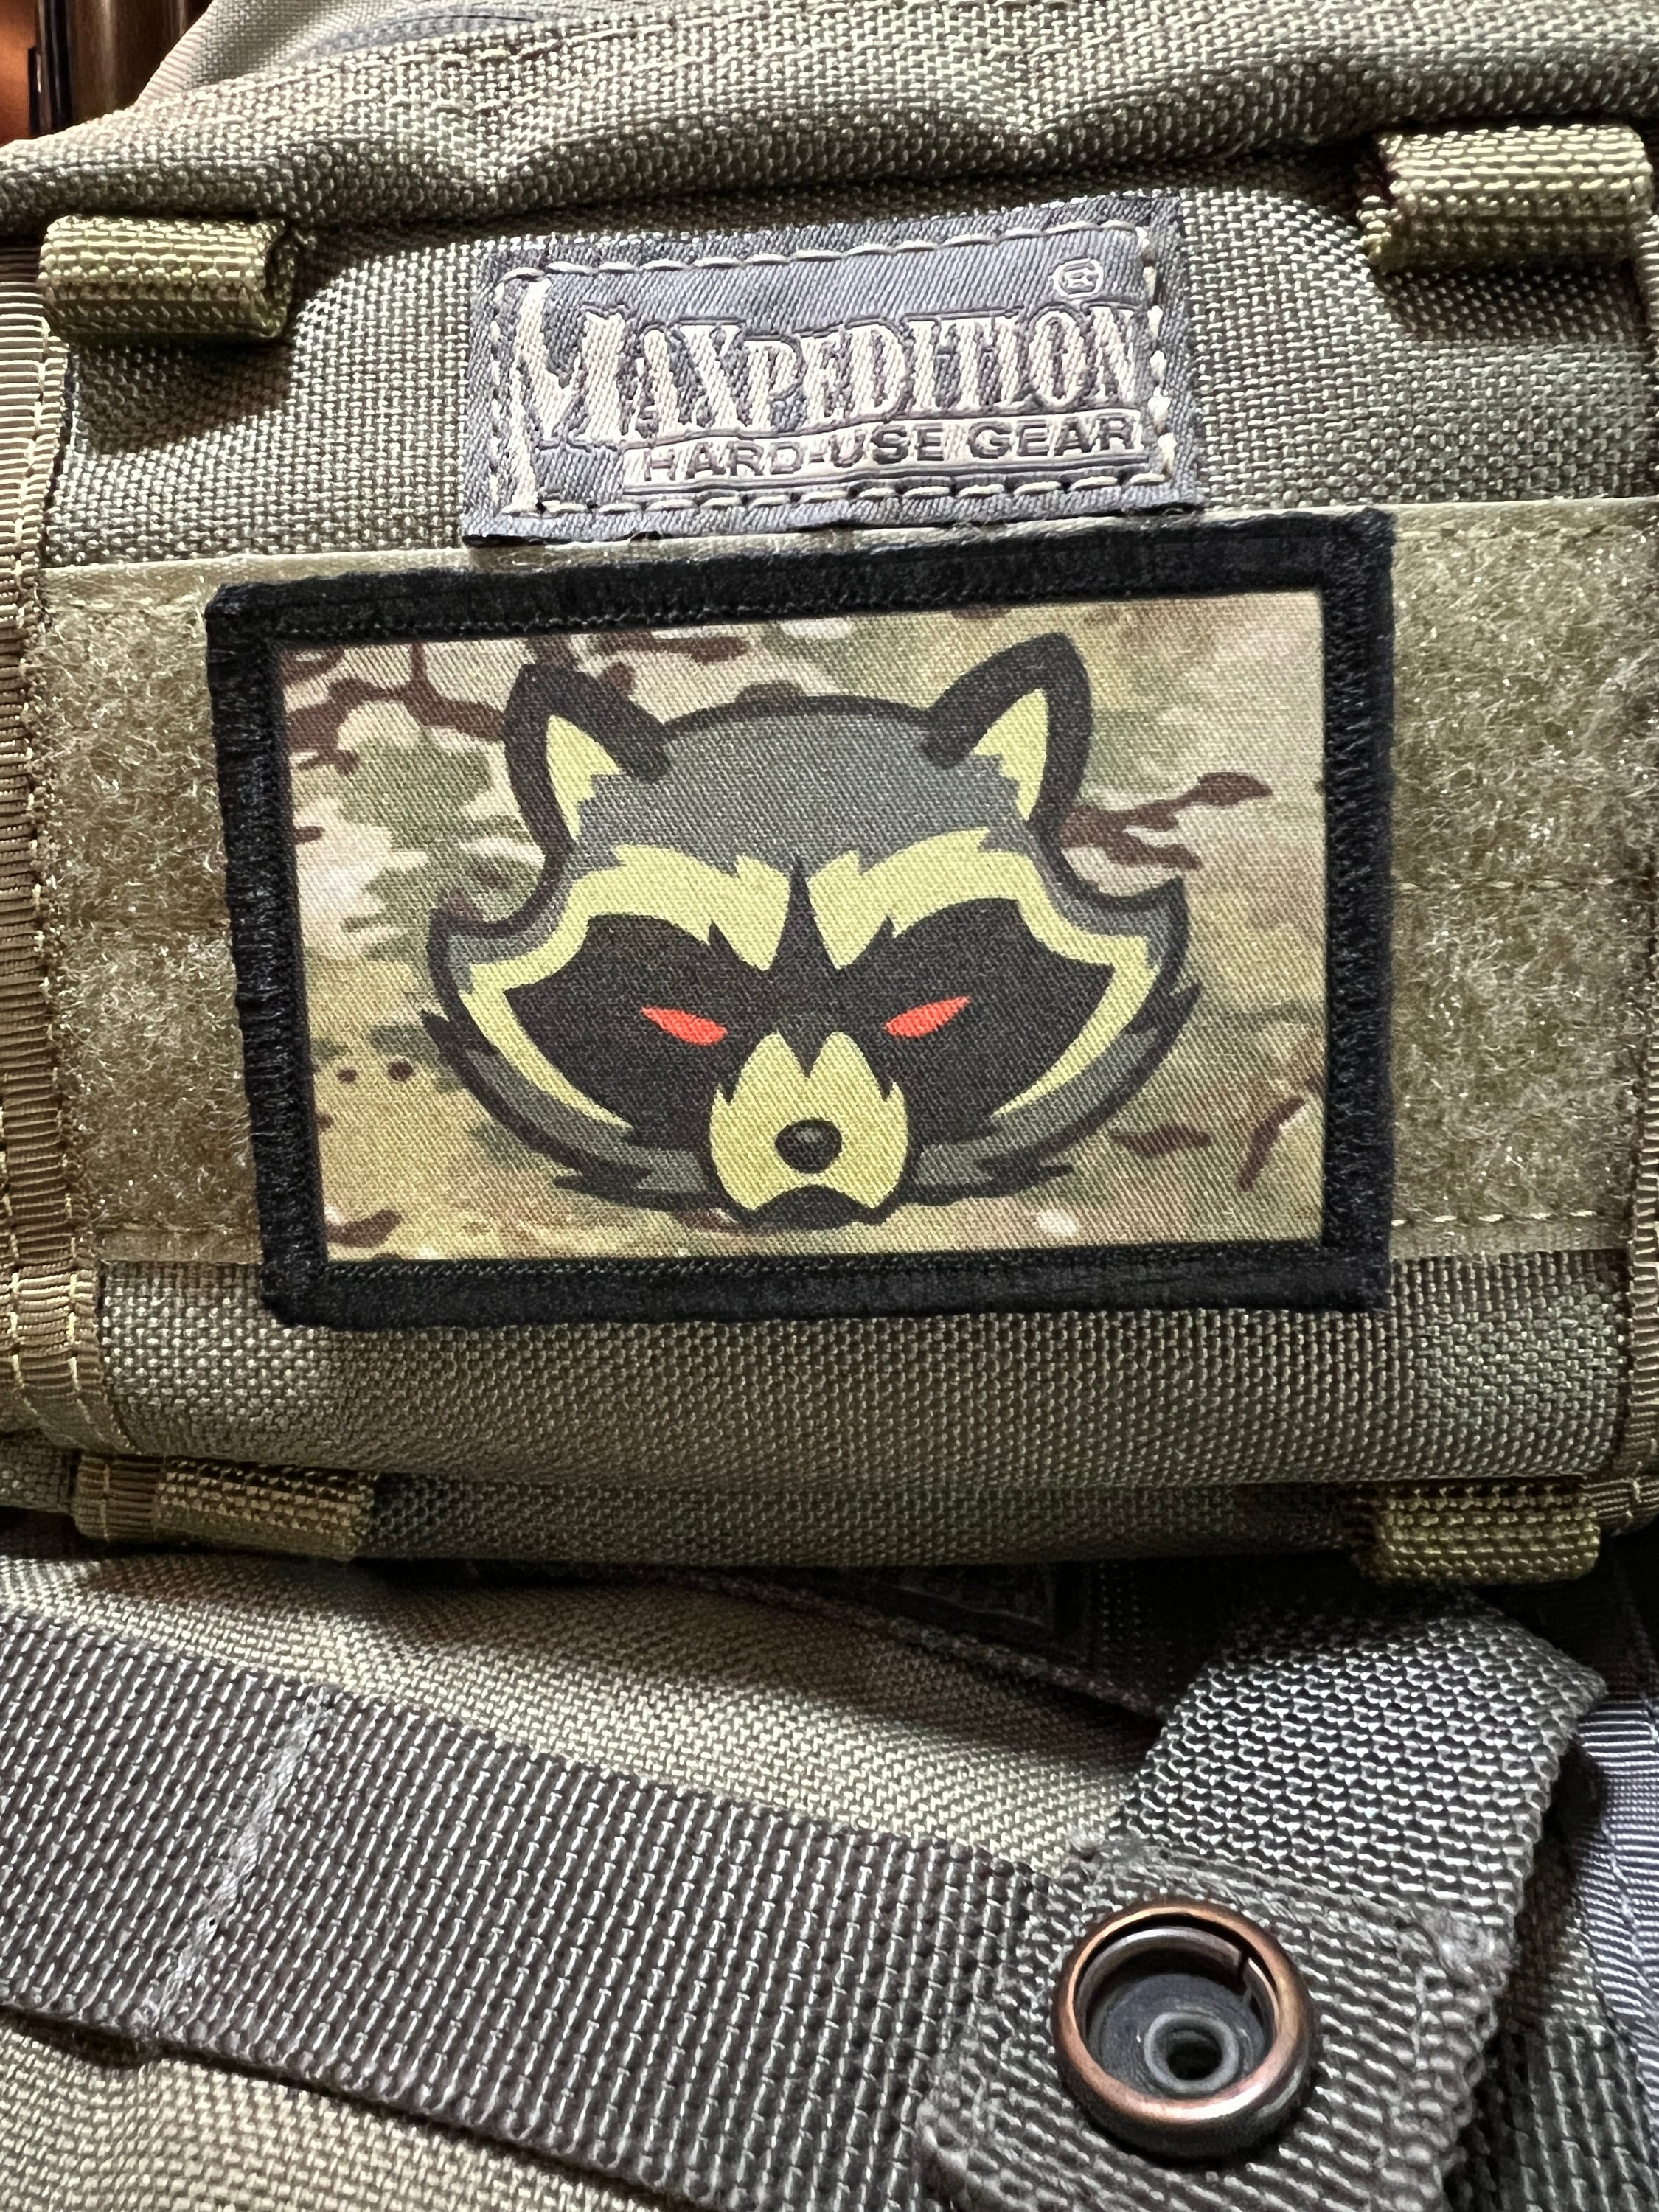  Guns and Coffee Morale Patch. Perfect for Your Tactical  Military Army Gear, Backpack, Operator Baseball Cap, Plate Carrier or Vest.  2x3 Hook Patch. Made in The USA : Sports & Outdoors